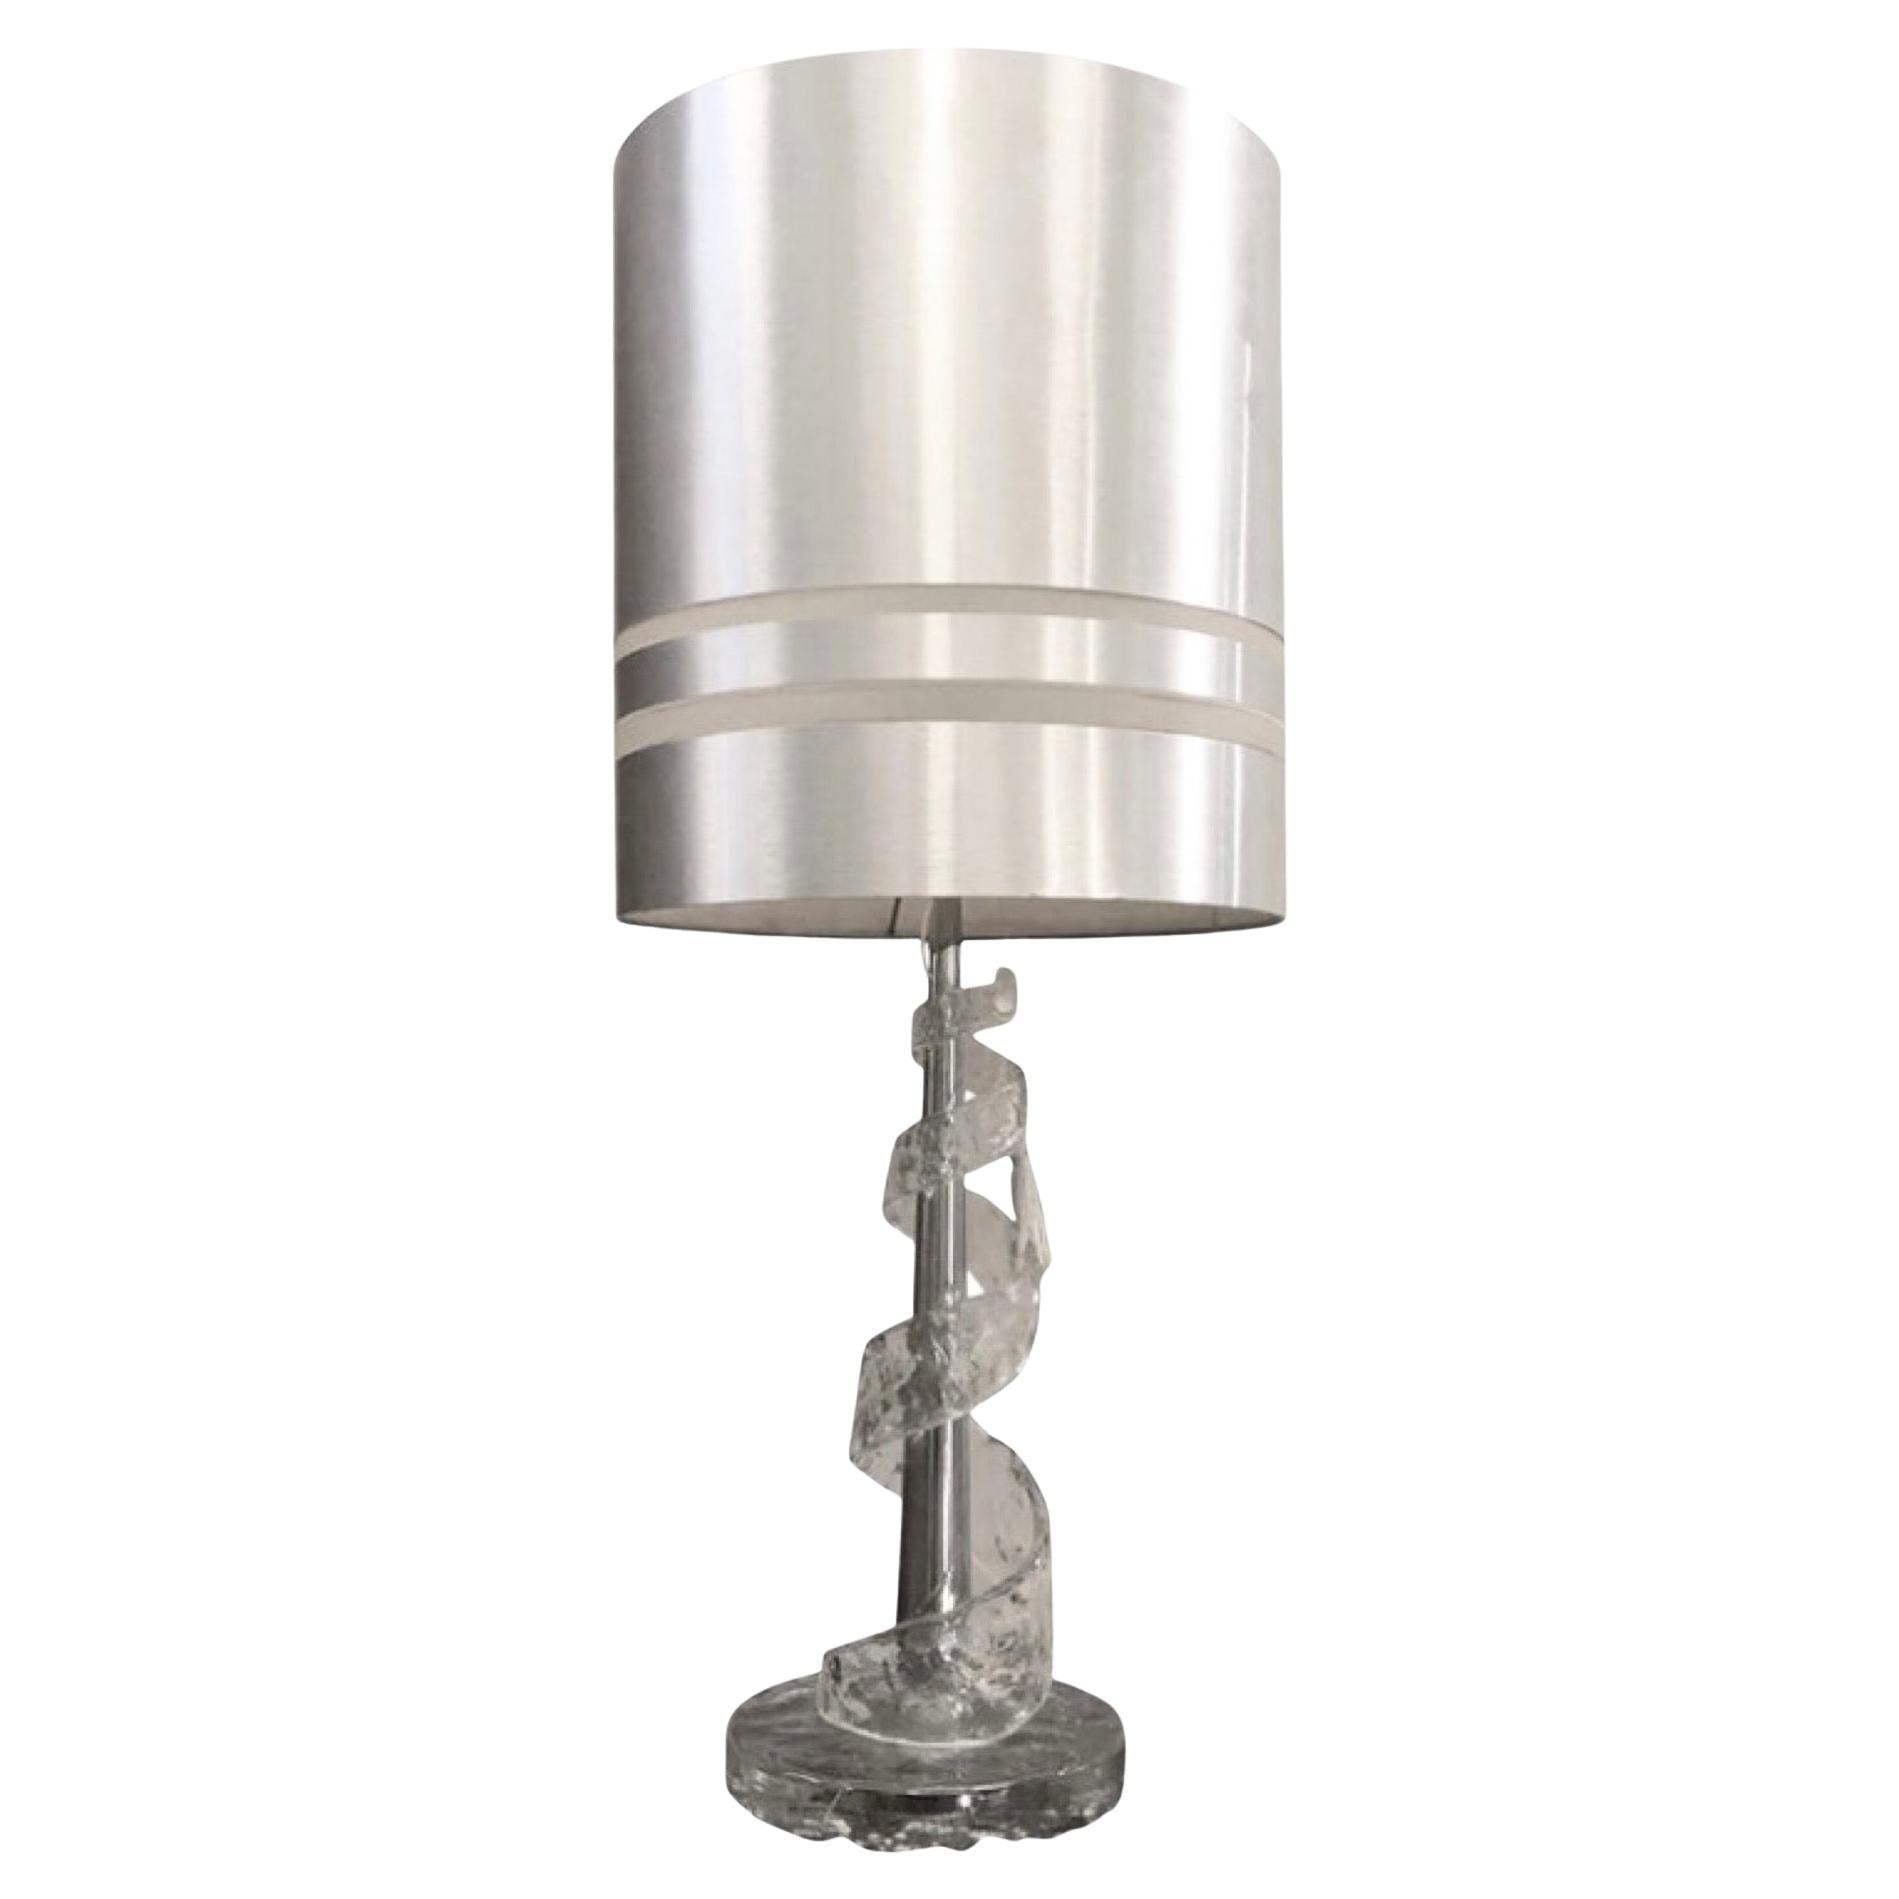 Angelo Brotto Table Lamps